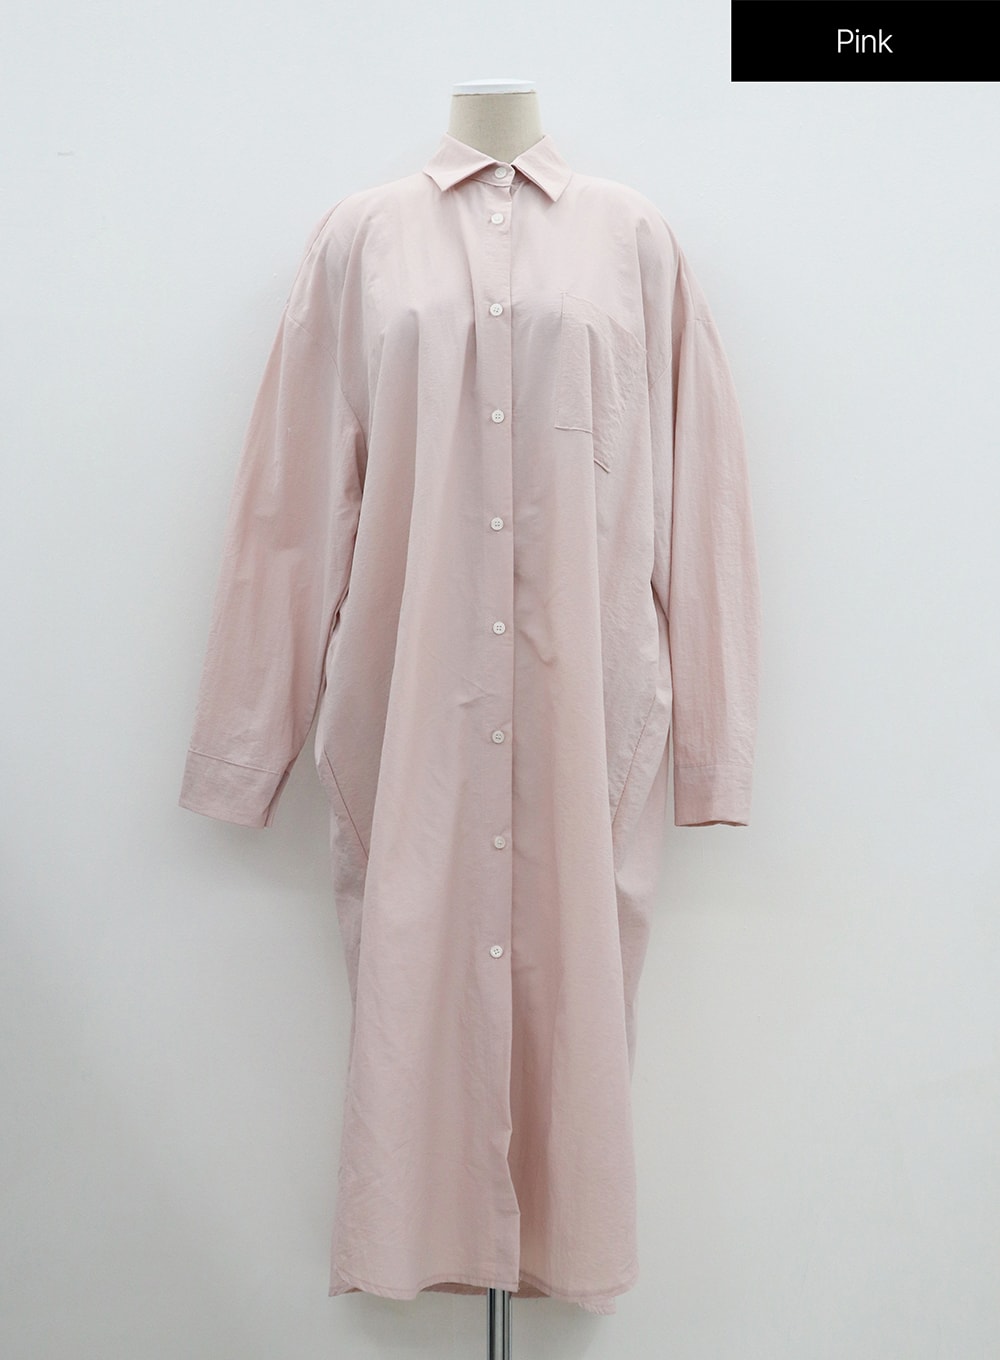 TODAYFUL stitch over shirt pink シャツ ピンク - トップス